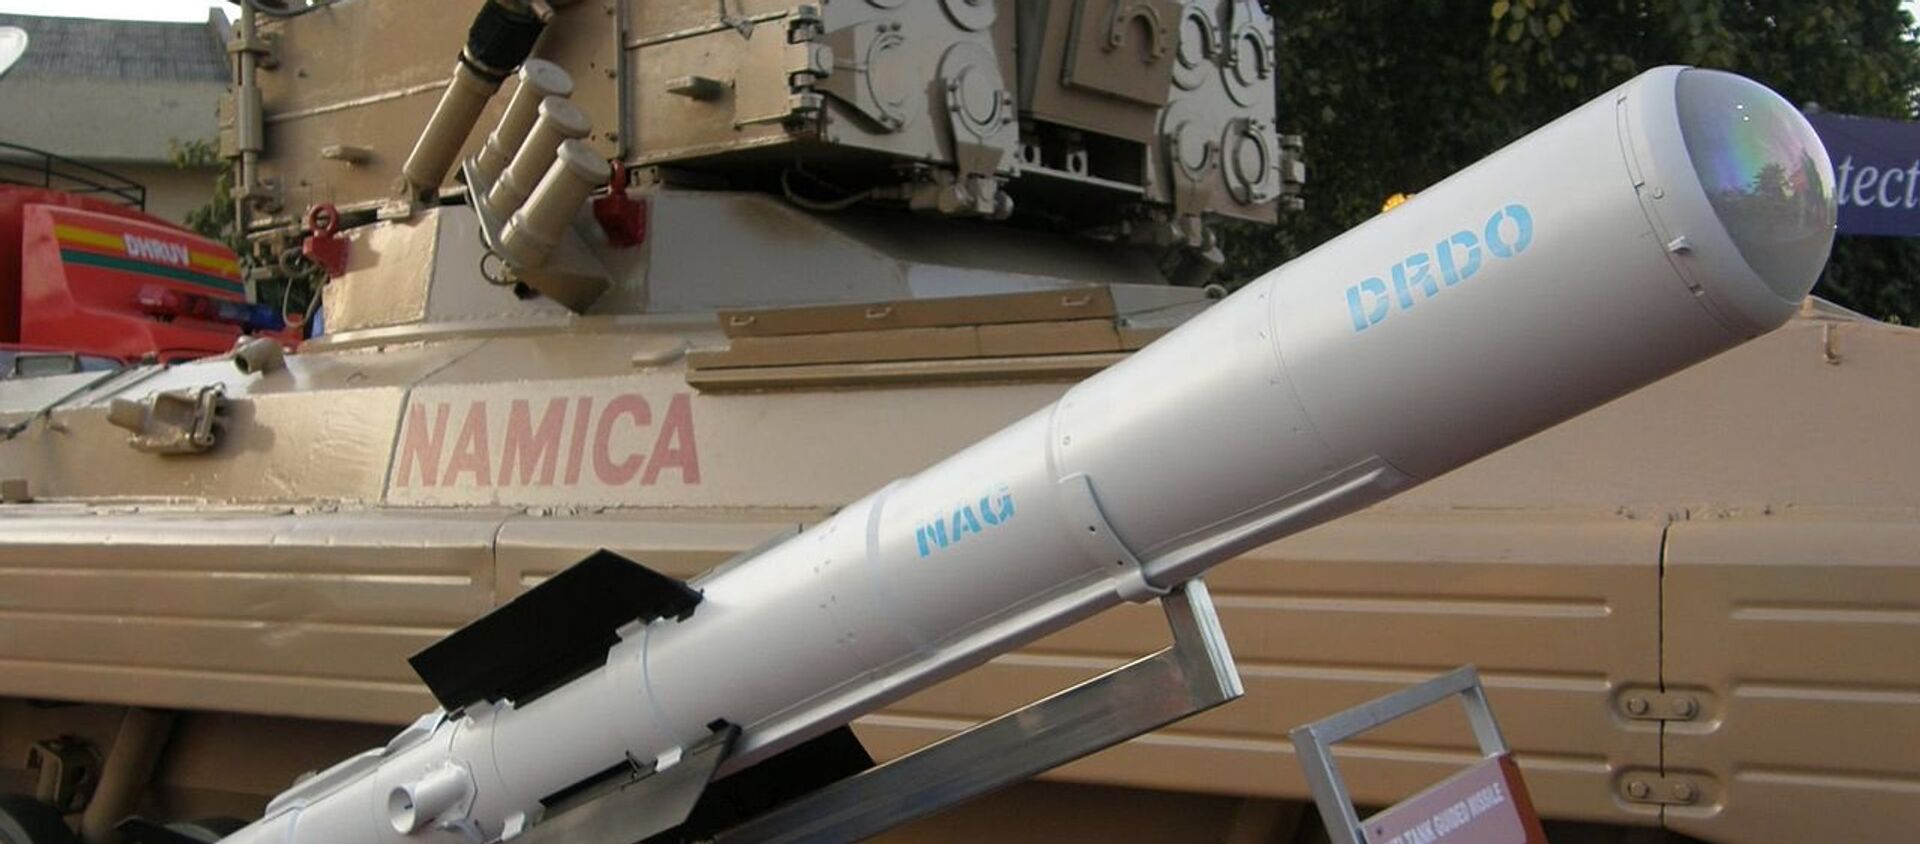 An image of the Nag missile and the Nag missile Carrier Vehicle (NAMICA), taken during DEFEXPO-2008, in Pragati Maidan, New Delhi, on 15th February 2008.  - Sputnik International, 1920, 22.07.2020